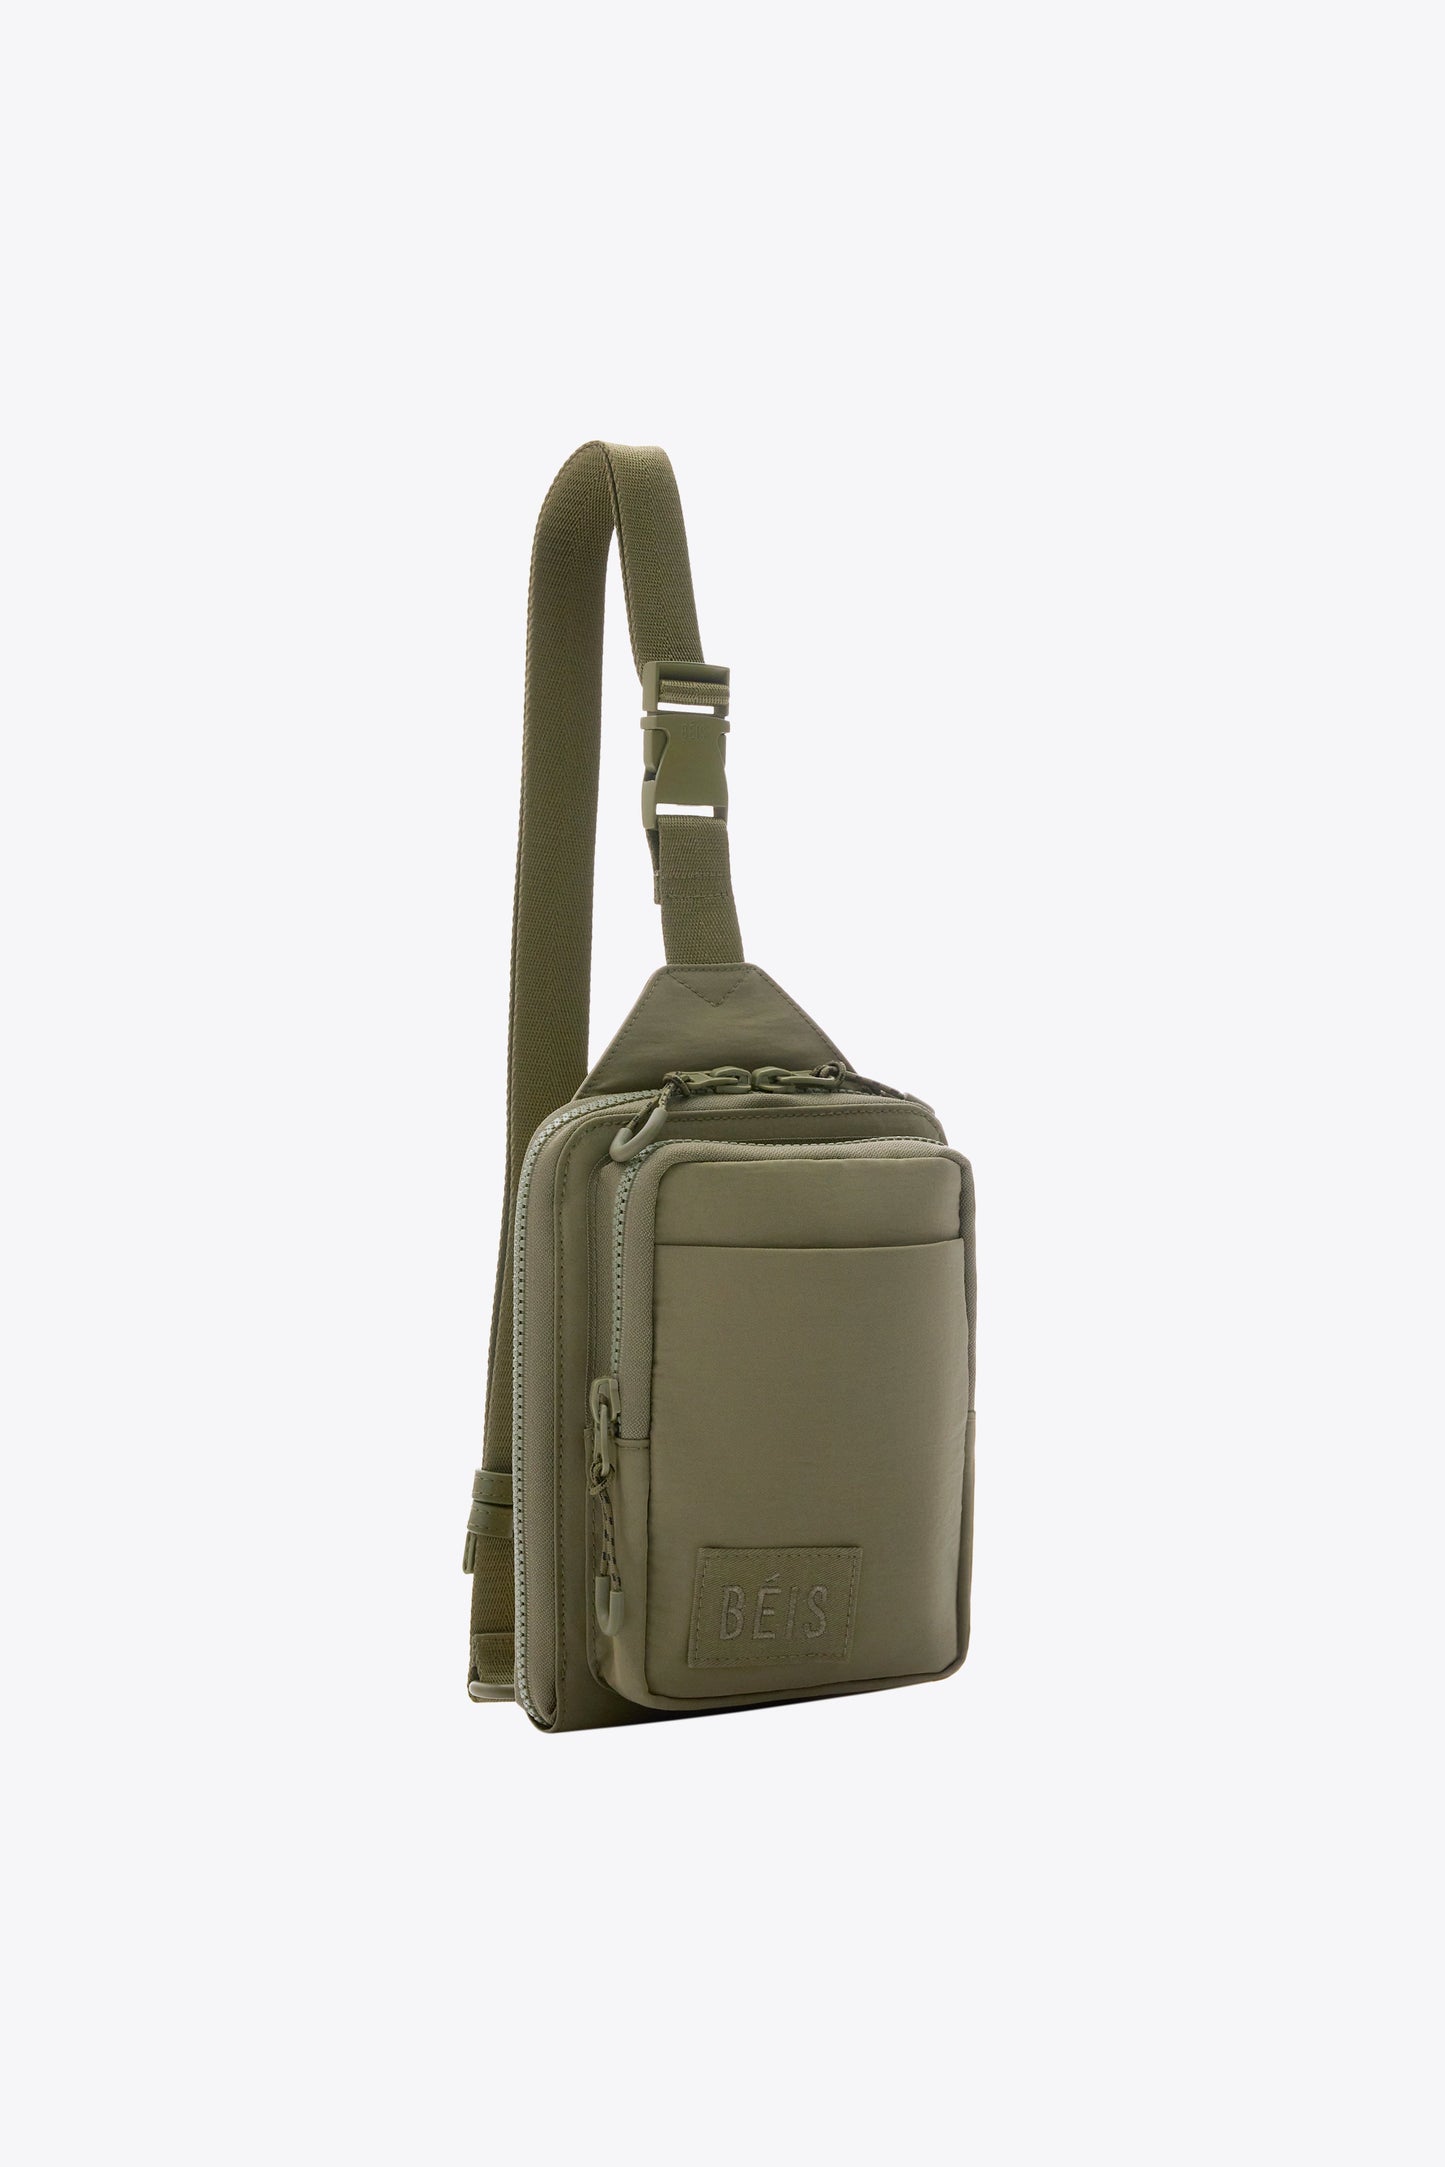 The Sport Sling in Olive